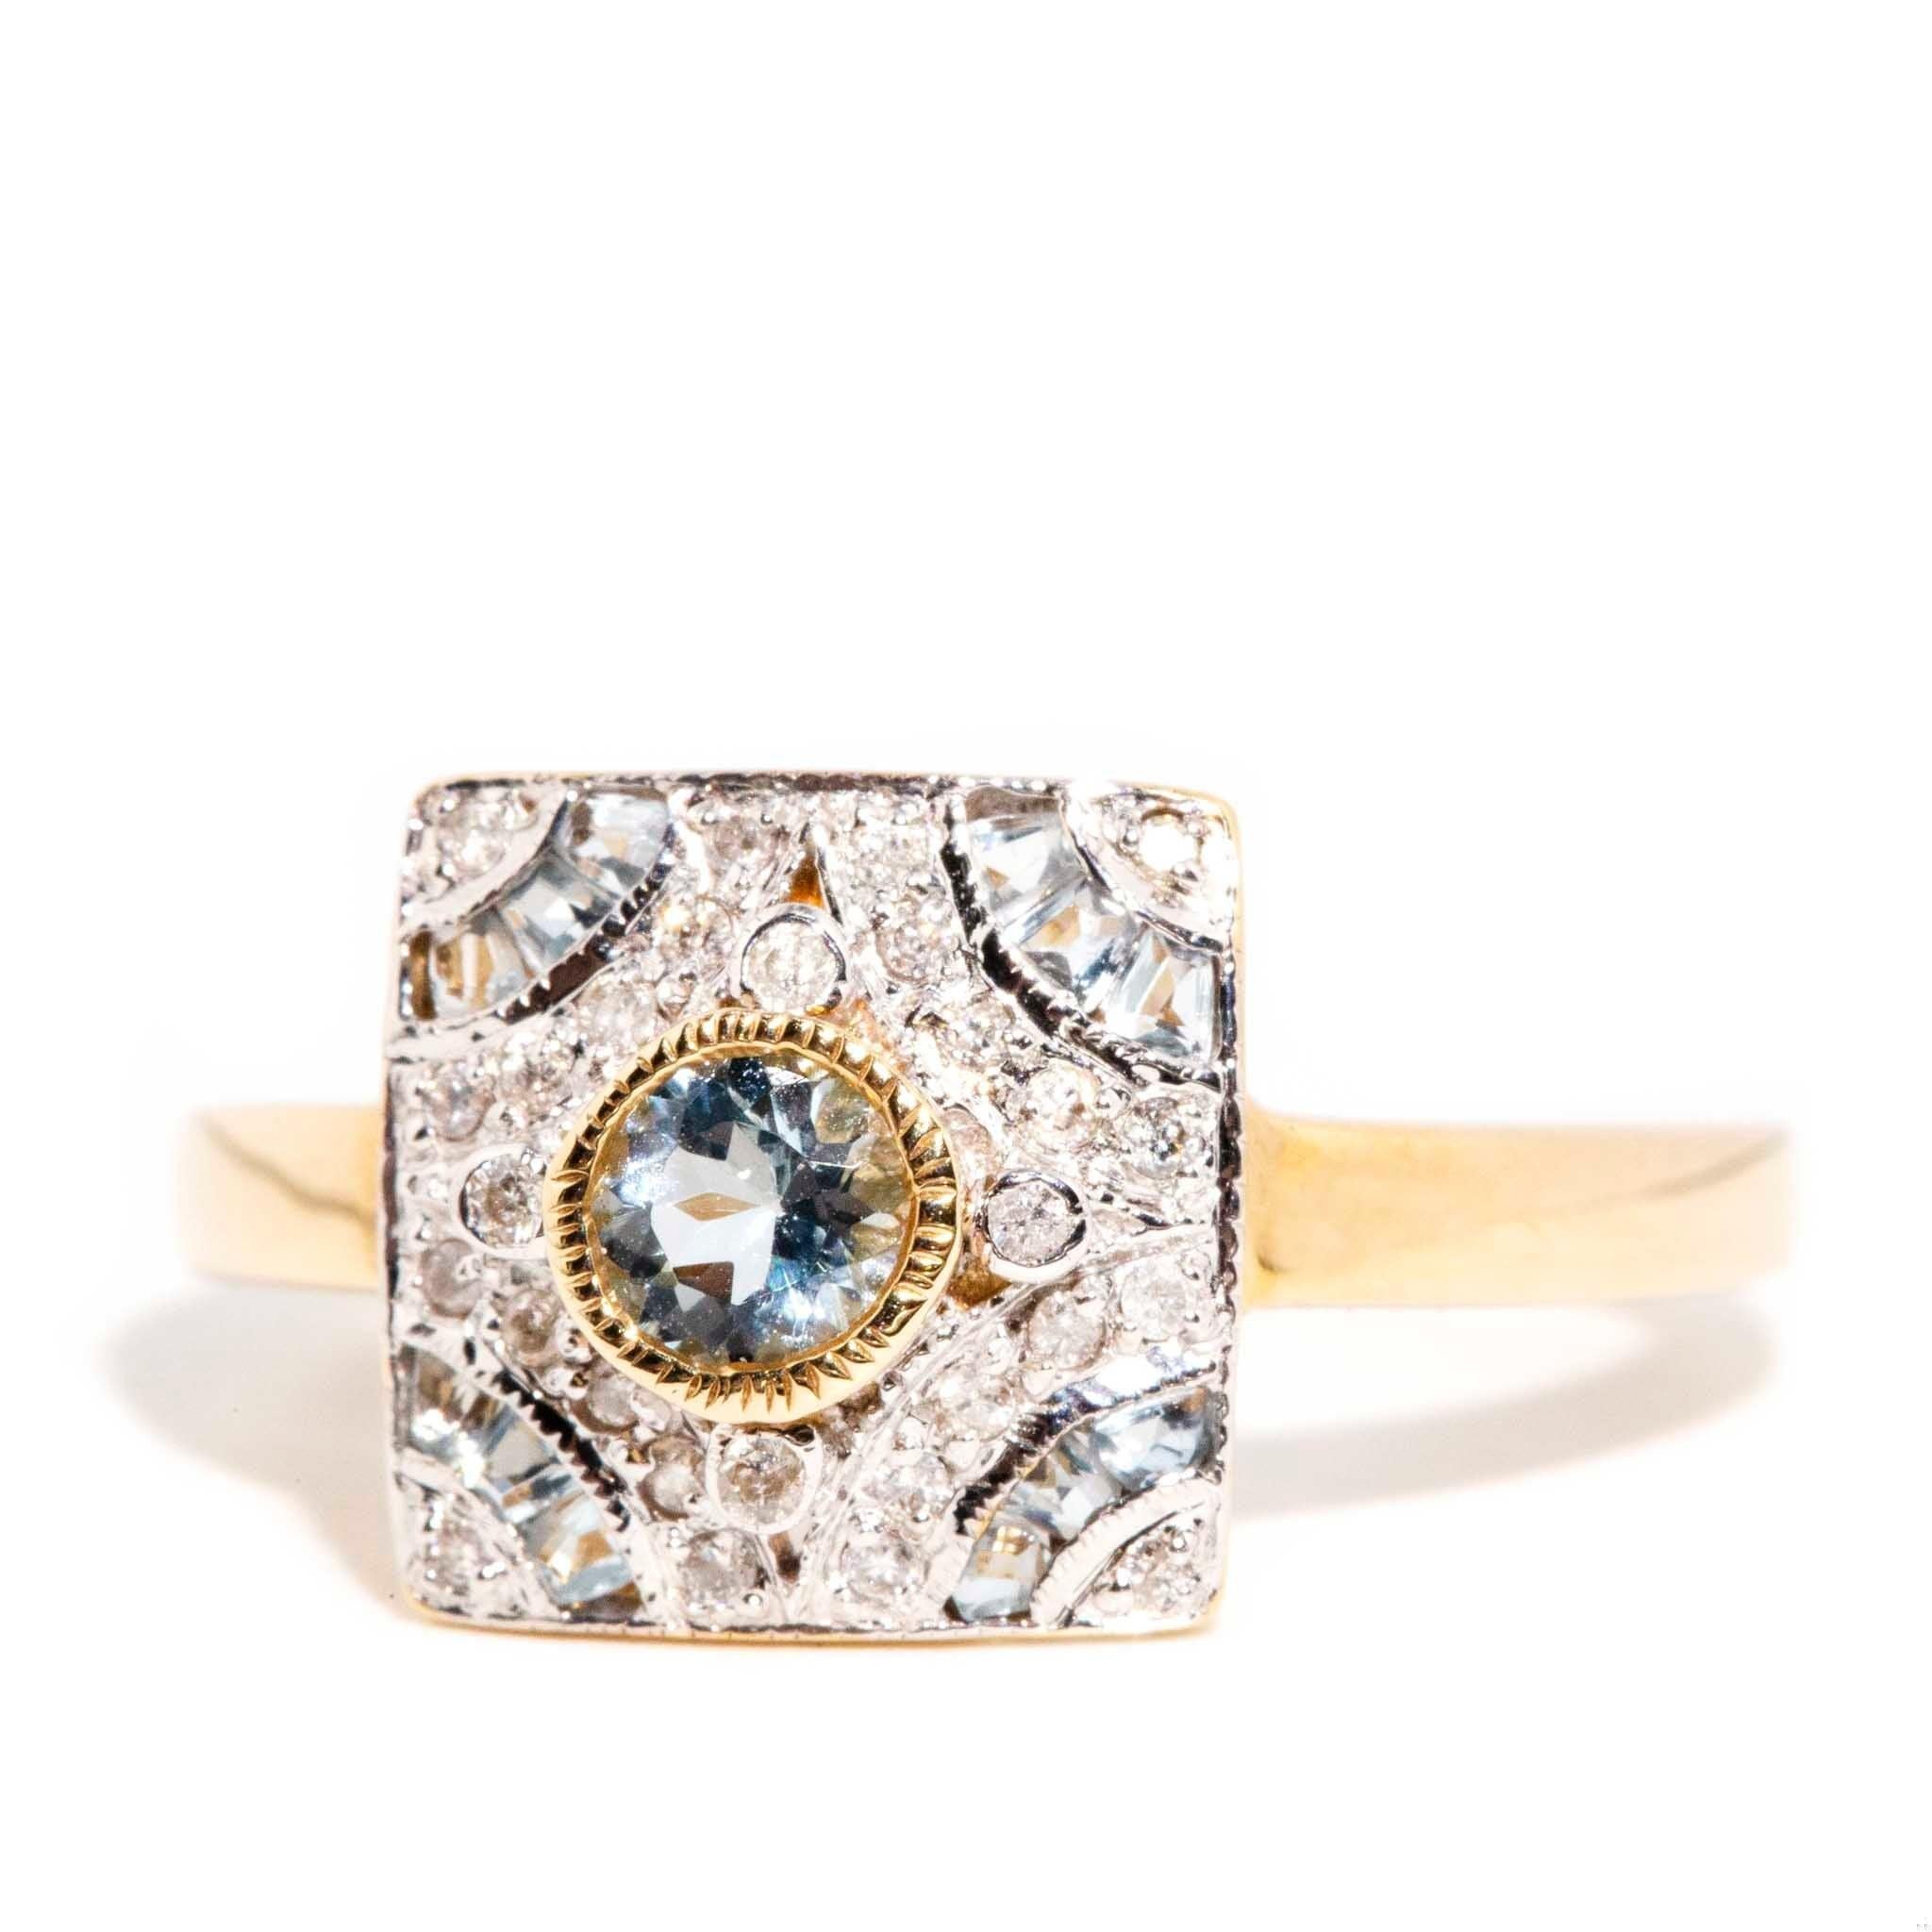 The sweet romances of our cinematic past were tales of love found, lost, then found again. Charming and silly but at their heart was love, a sweet and abiding love that stayed true. The 9 carat gold Jayne Ring with her blue aquamarine and diamond